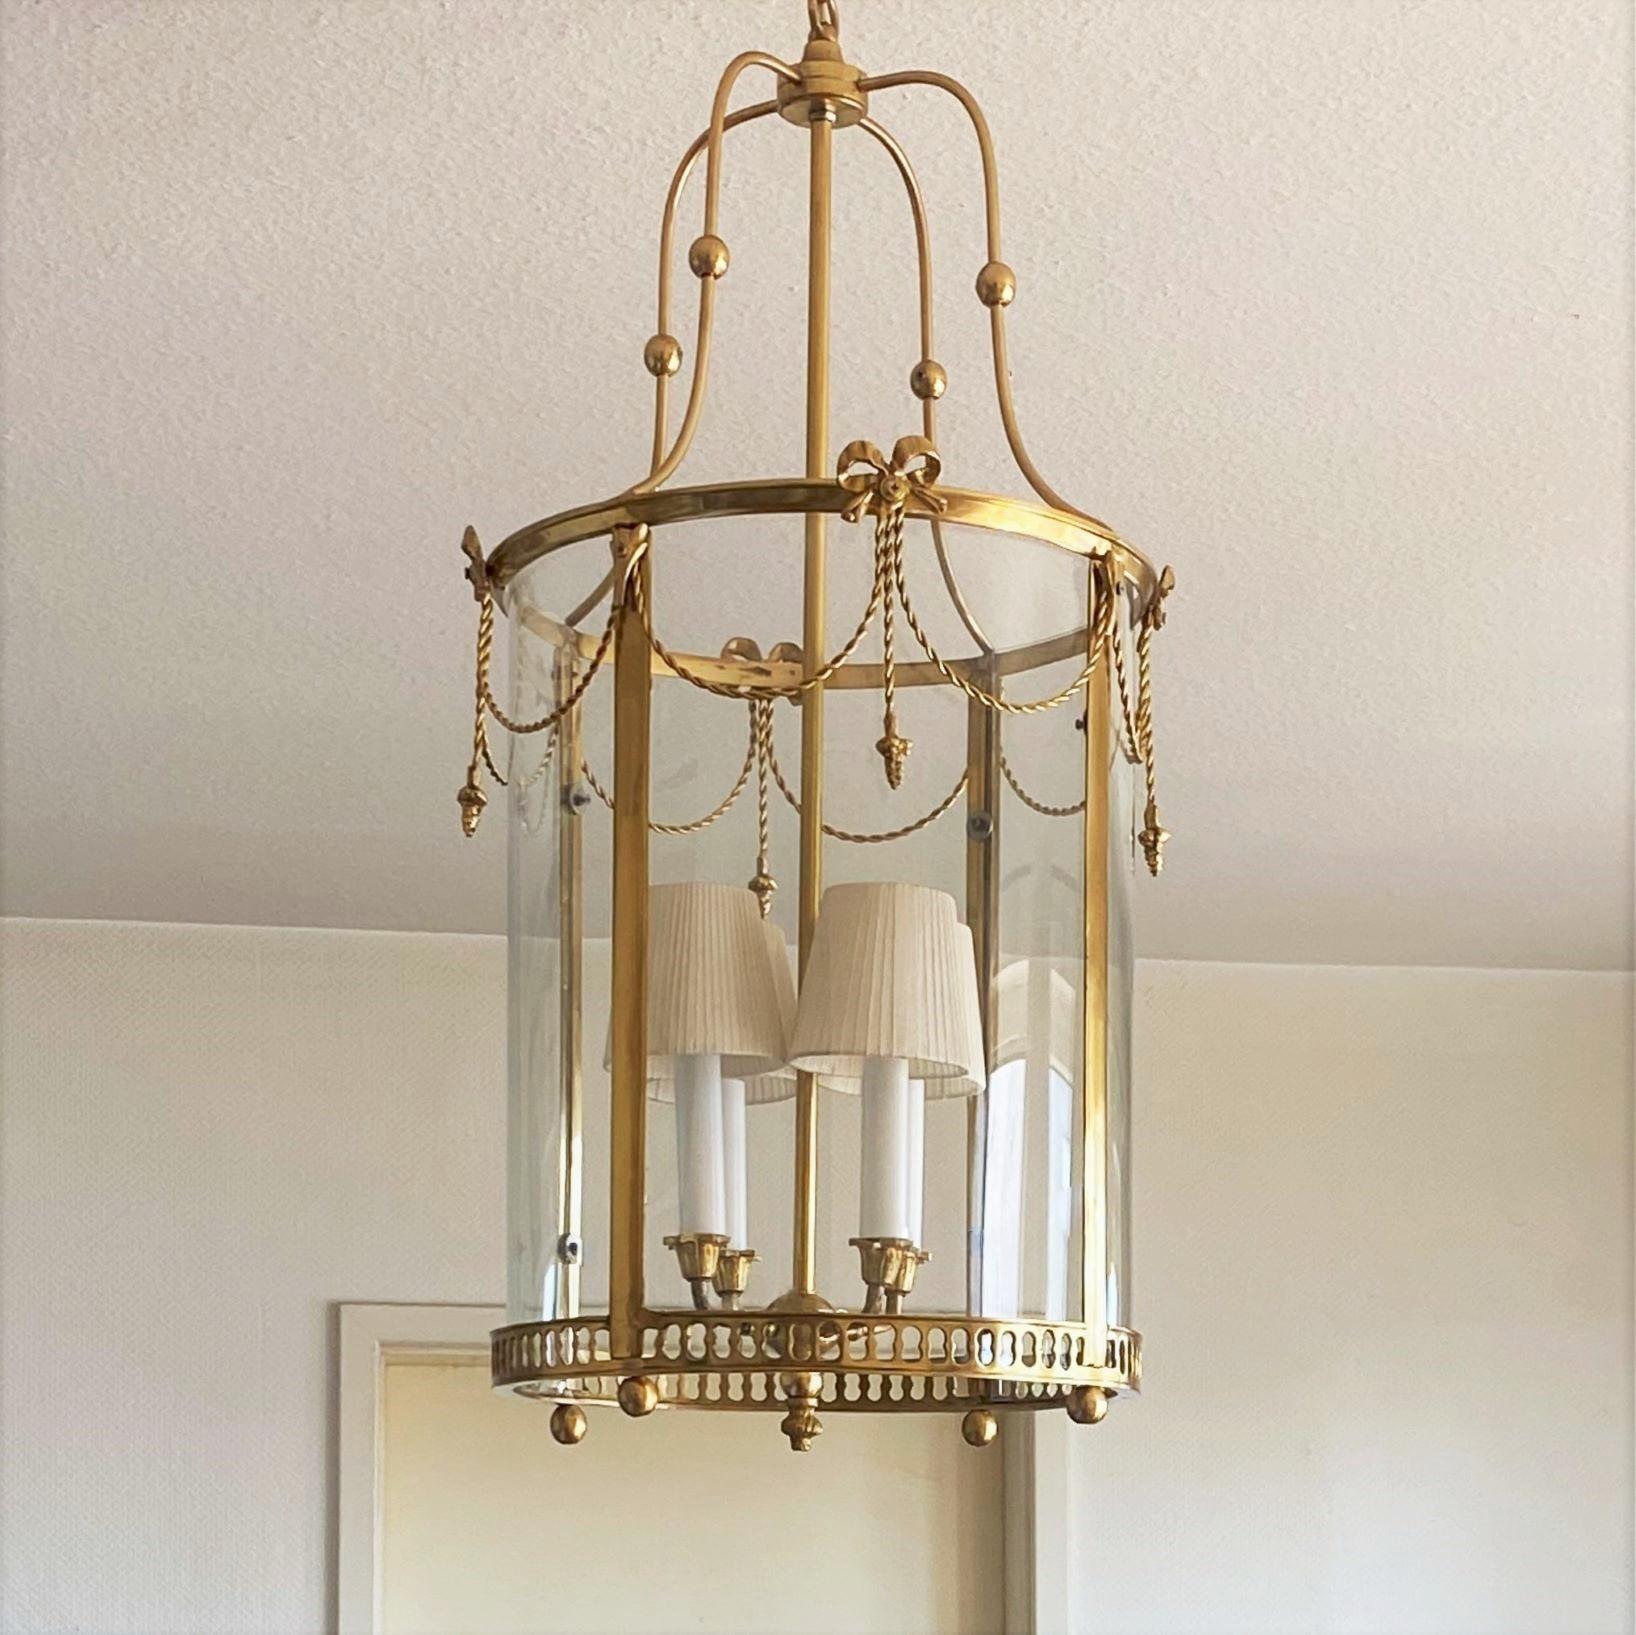 A very elegant gilt bronze and brass mounted cylindrical lantern with a central four-light candelabra cluster, France, 1920-1930. Finely handcrafted, clean lines and modern design inspired by Louis XVI style. Four original curved crystal glass